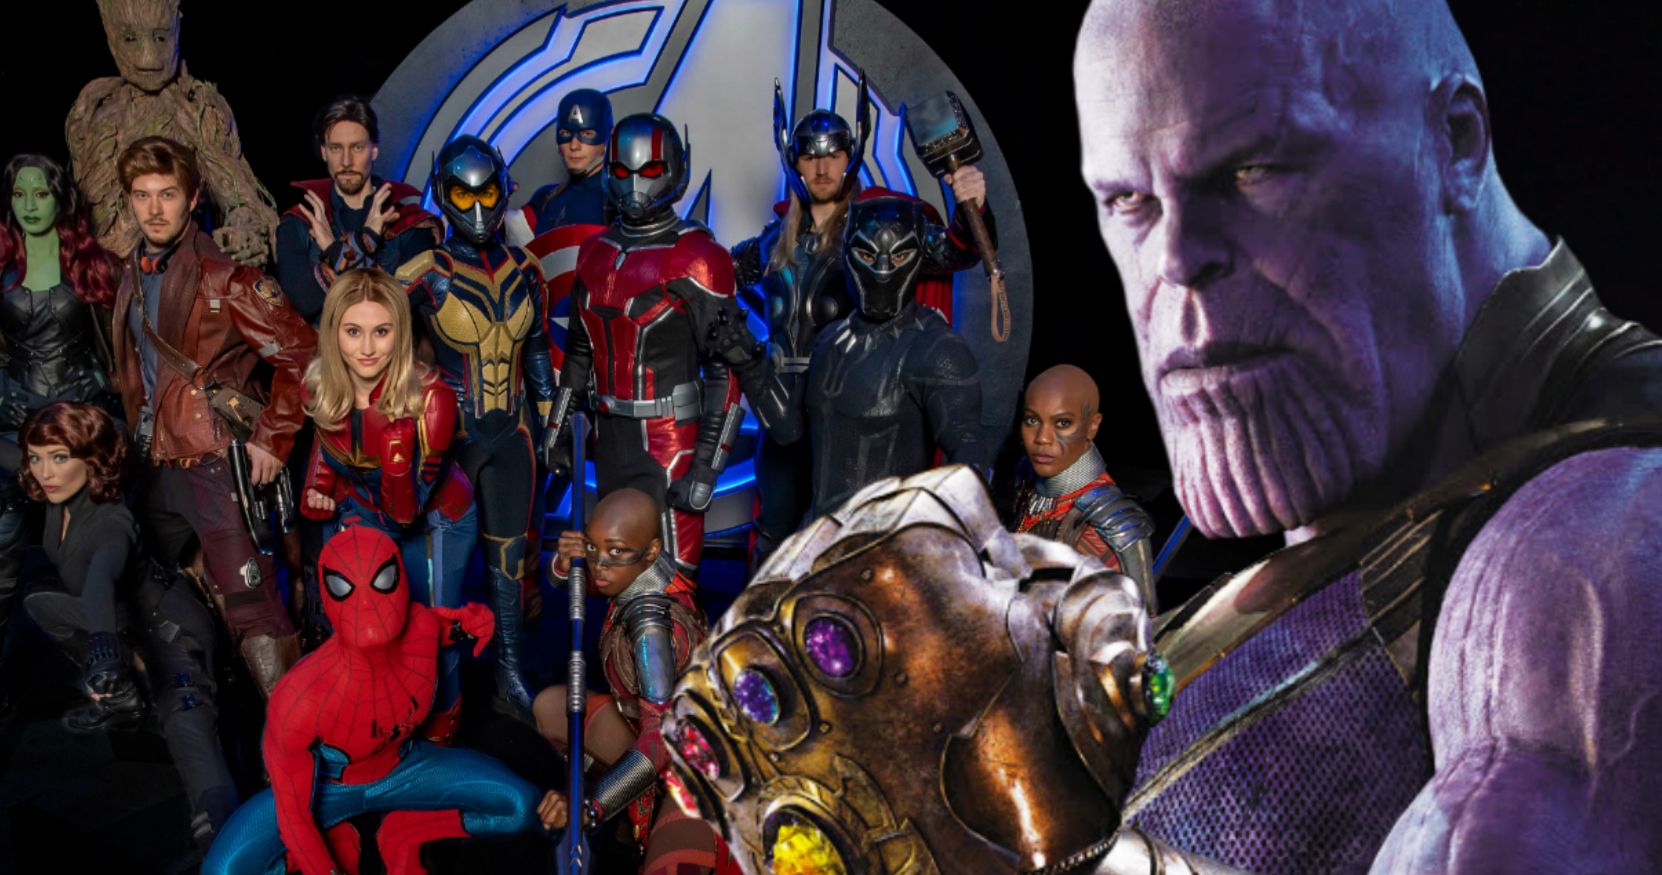 Disneyland's Avengers Campus Takes Thanos' Snap Out of the Equation